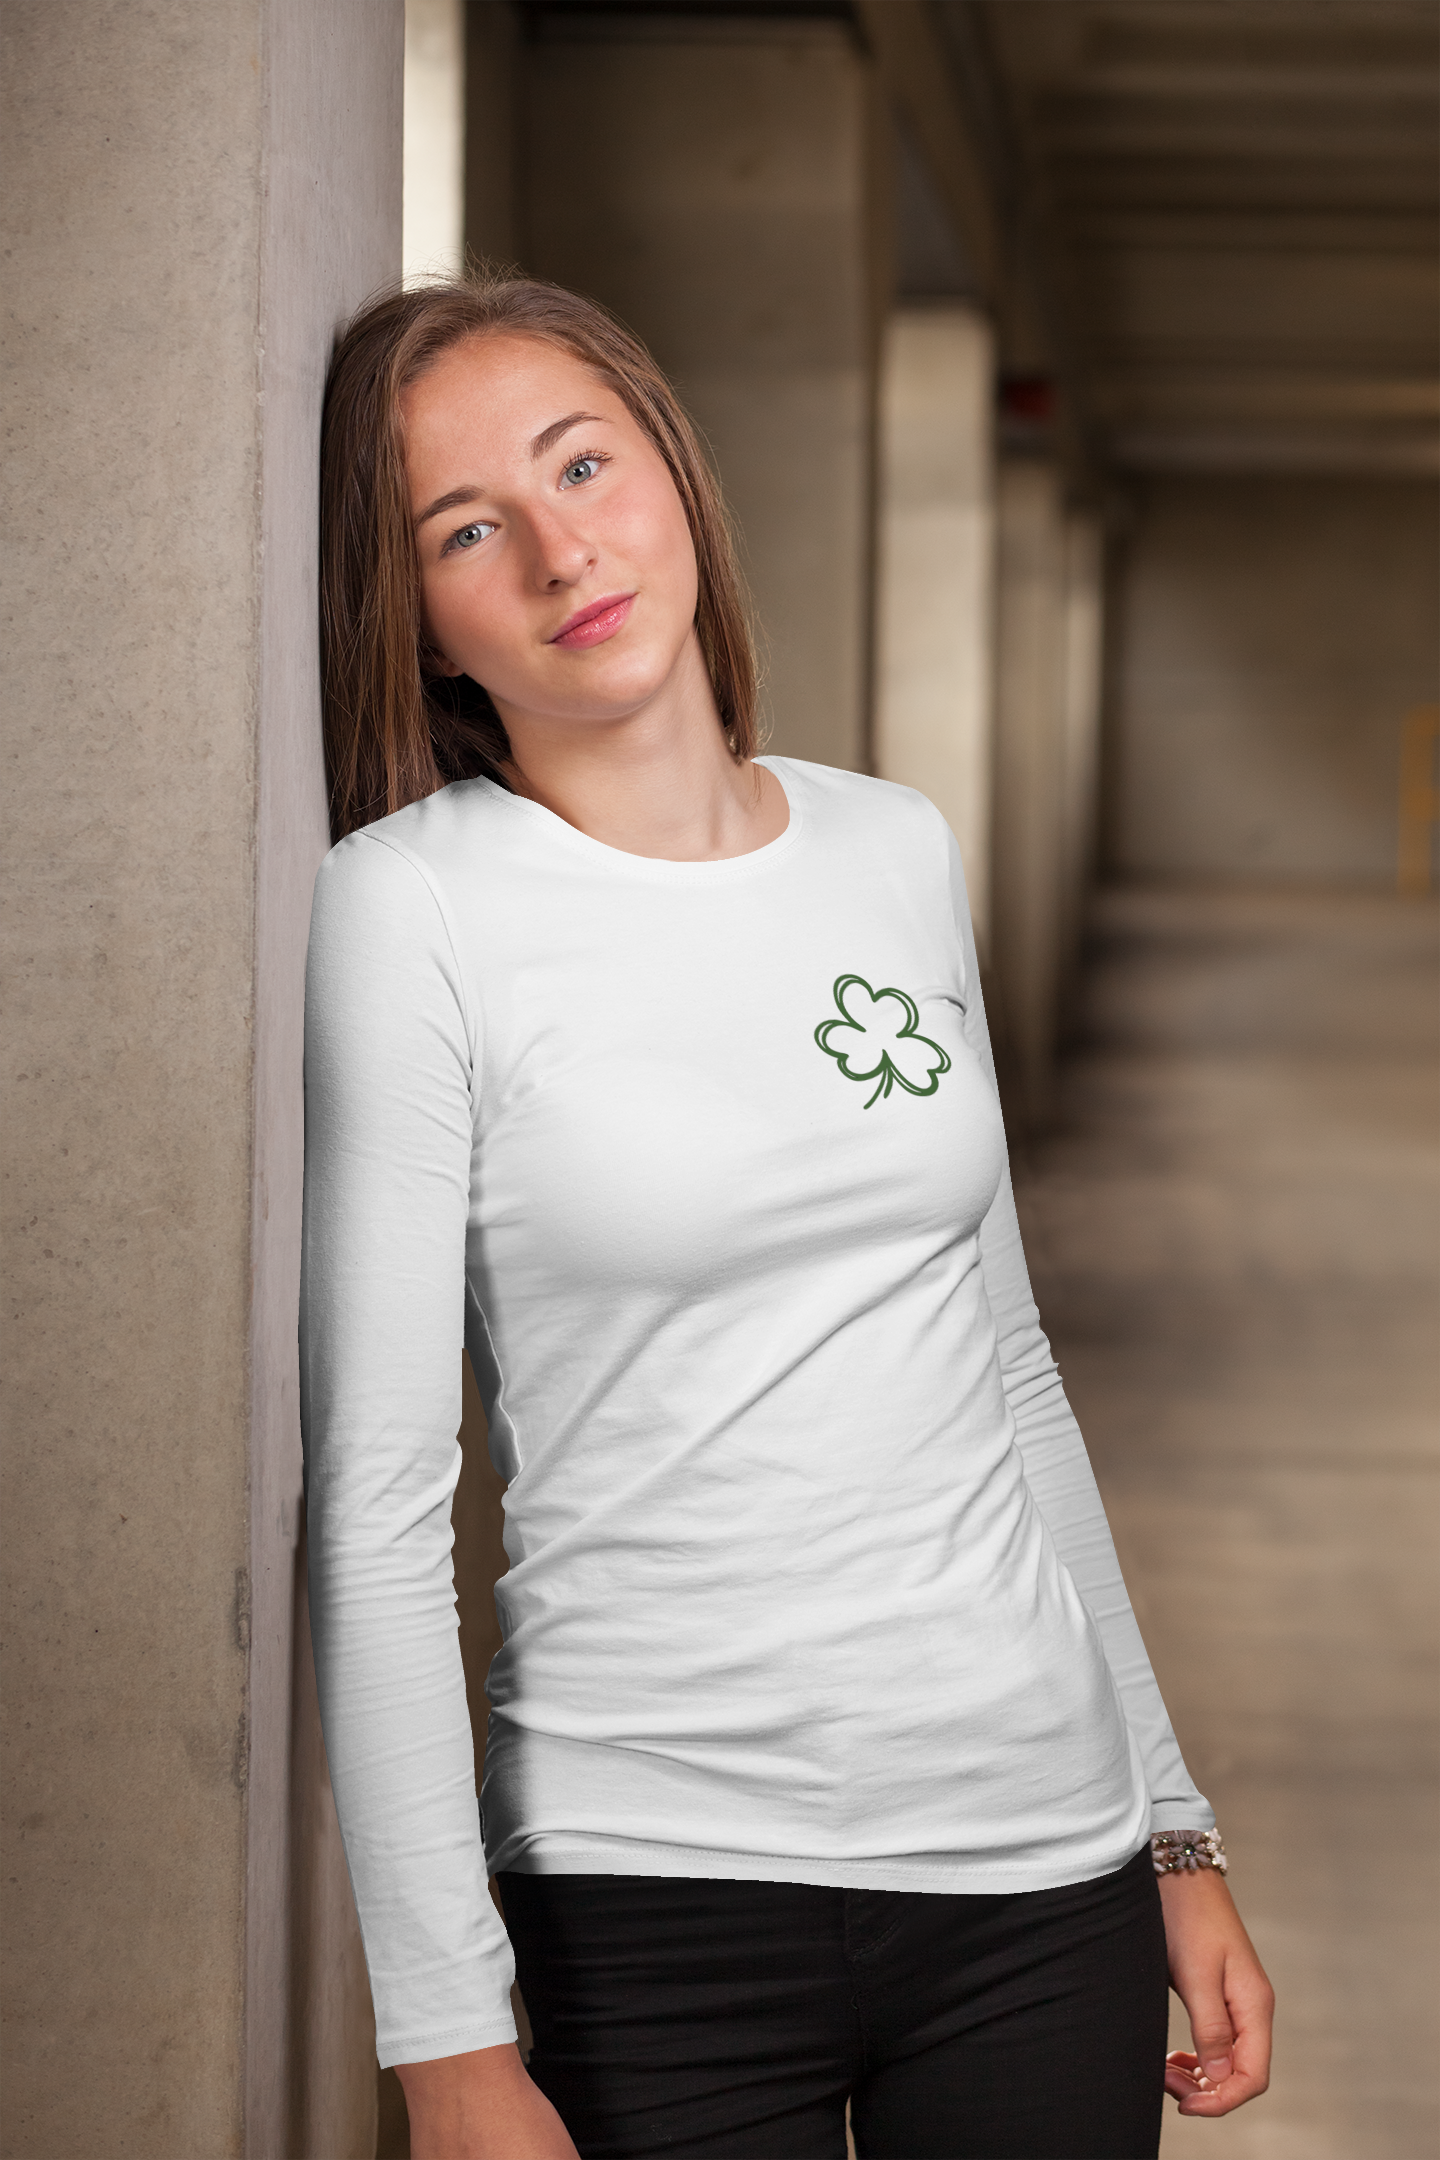 Feeling Lucky Long Sleeve Shirt in white. The back has a repetitive curvy saying "feeling lucky" with a smiley face making a peace sign with the eyes as clovers in green. The front has a four leaf clover pocket sale on the front in green. This is the front view of the shirt on a female model leaning up against a cement pillar.